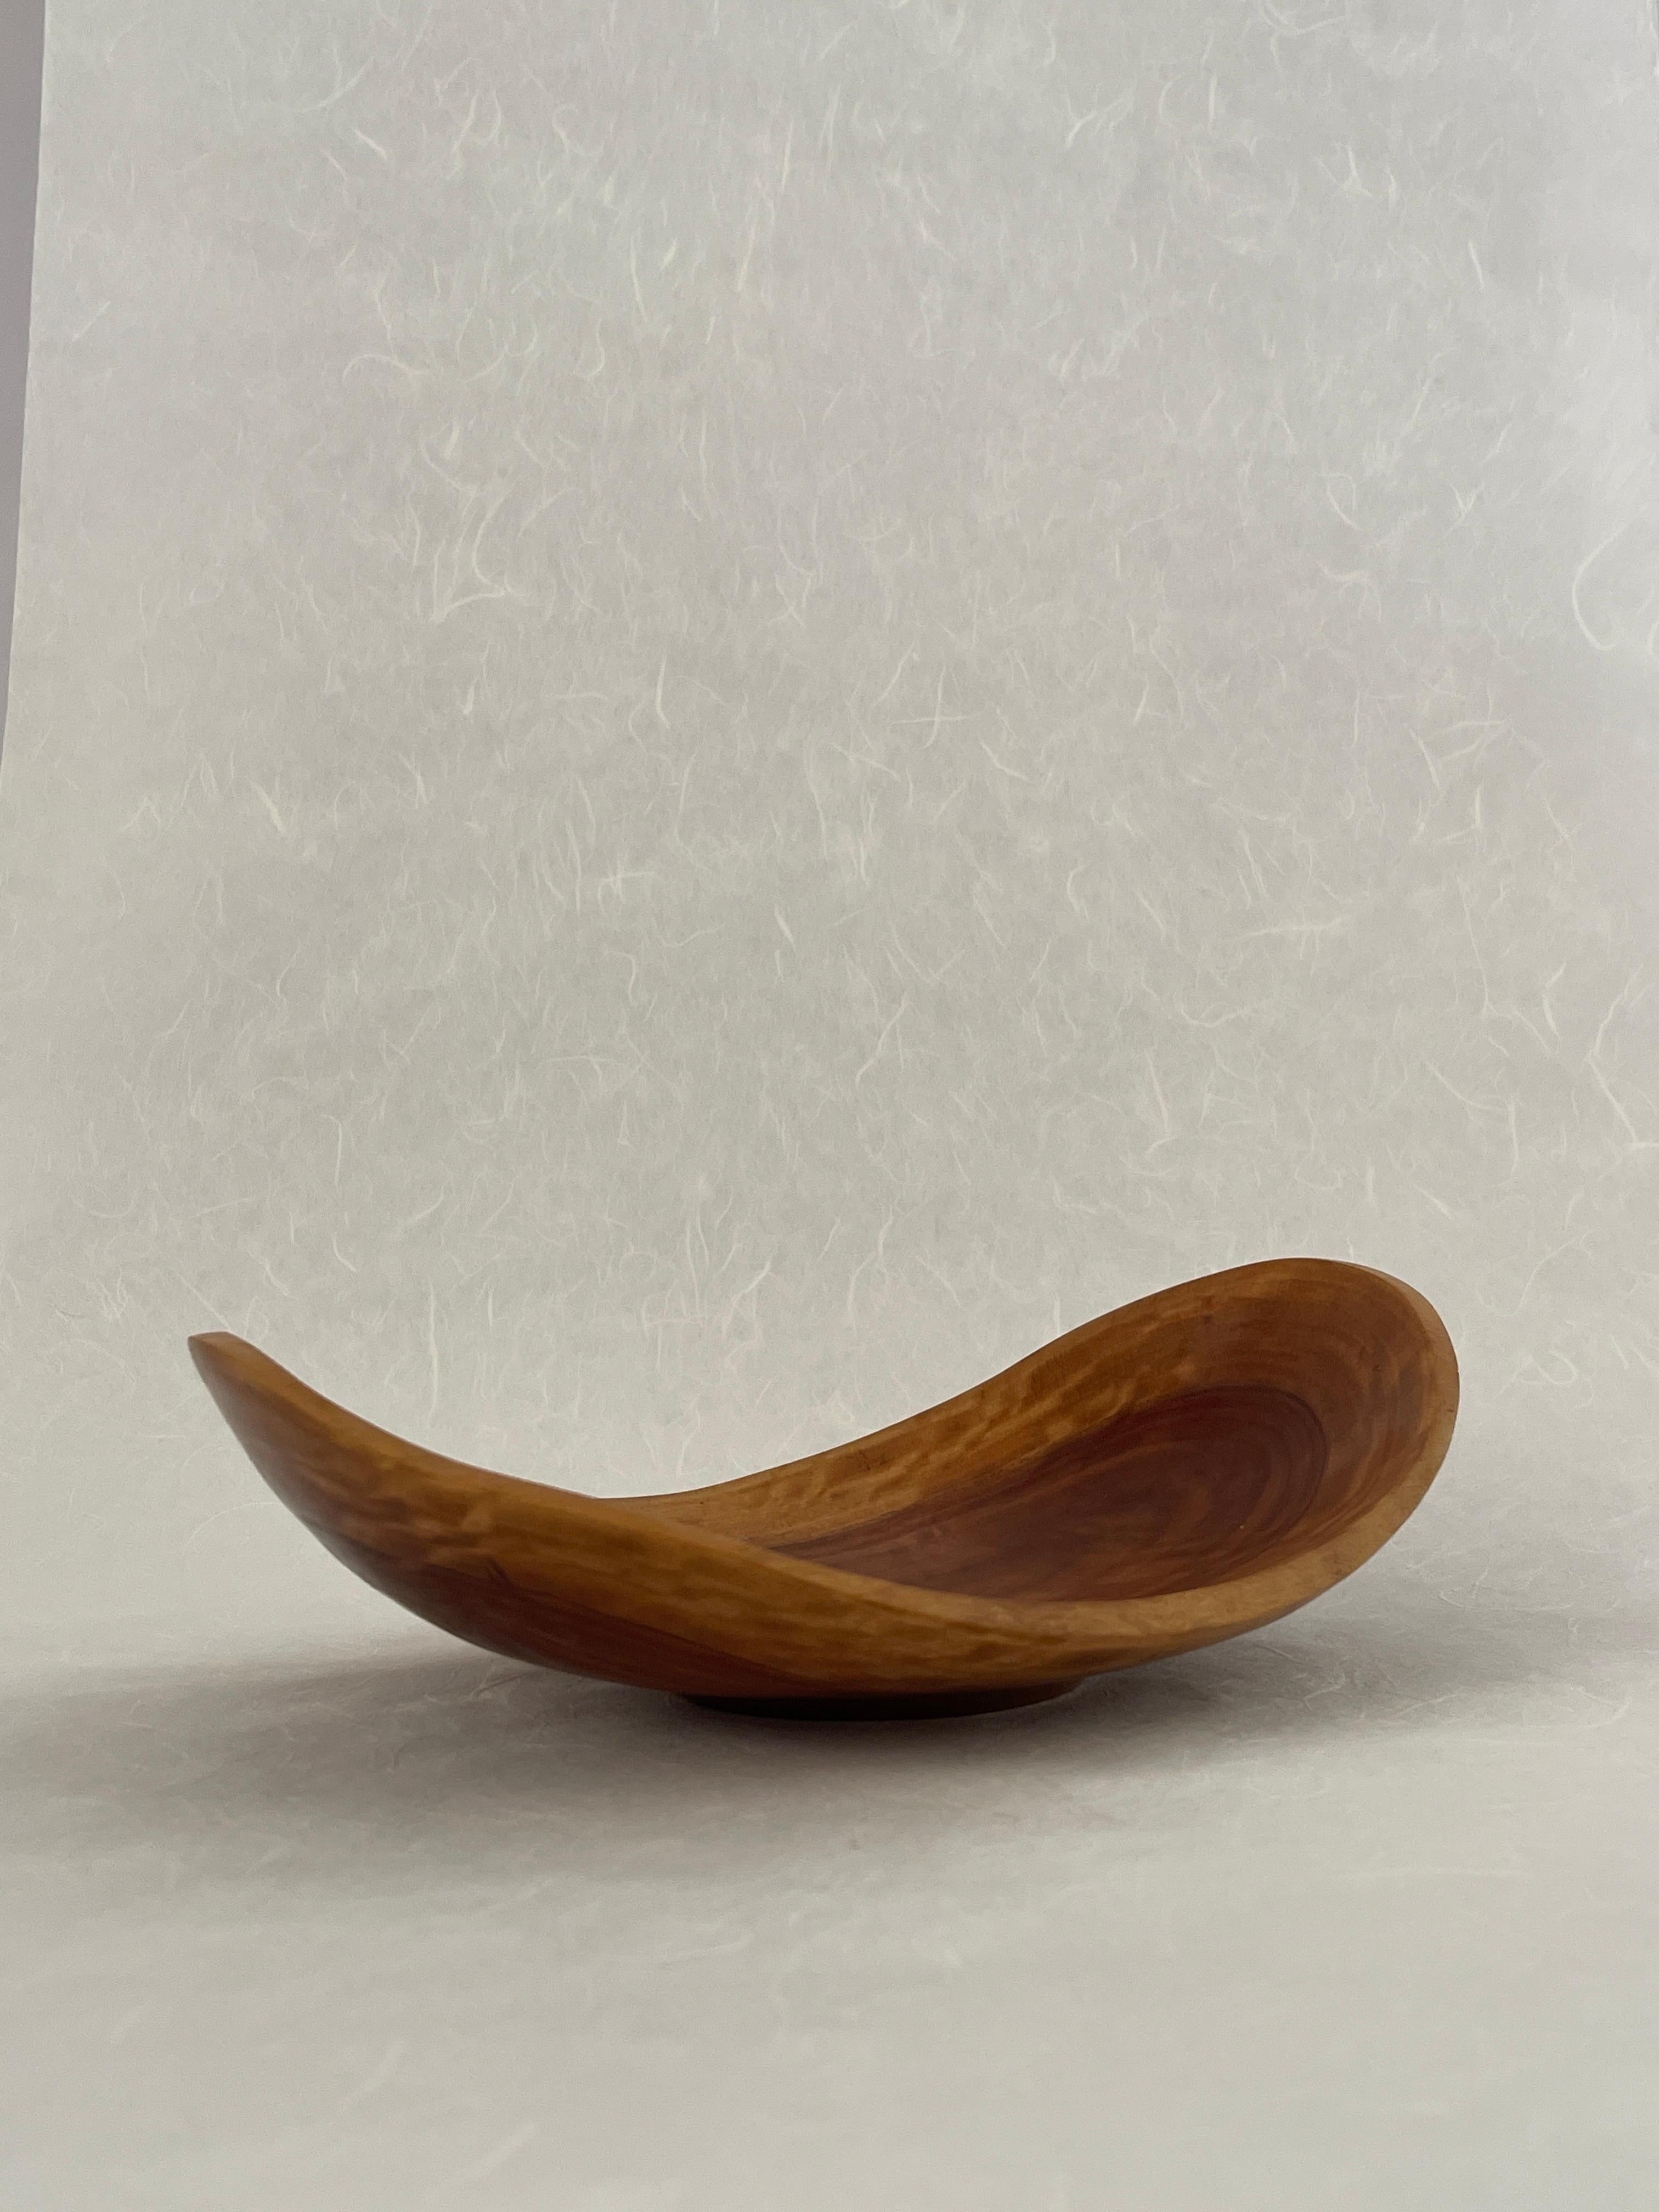 Hardwood 20th Century Ken Waller Hand Carved Eucalyptus Catchall Bowl For Sale